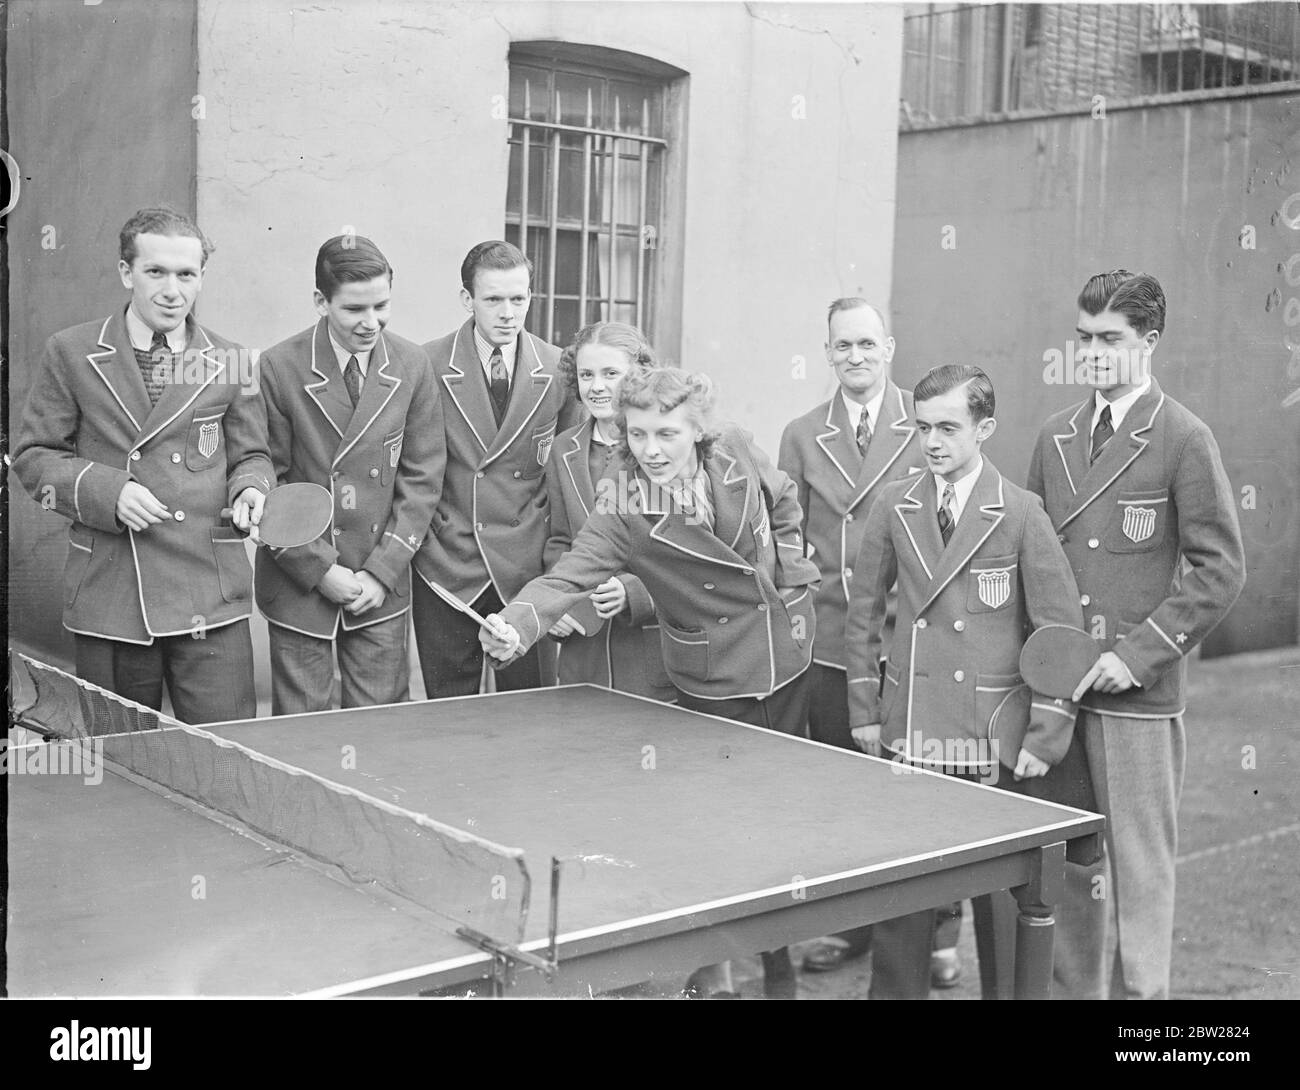 American table tennis girls practice immediately after arrival in London.  Only a few hours after their arrival from the United States, members of the American  team were practising at their London hotel